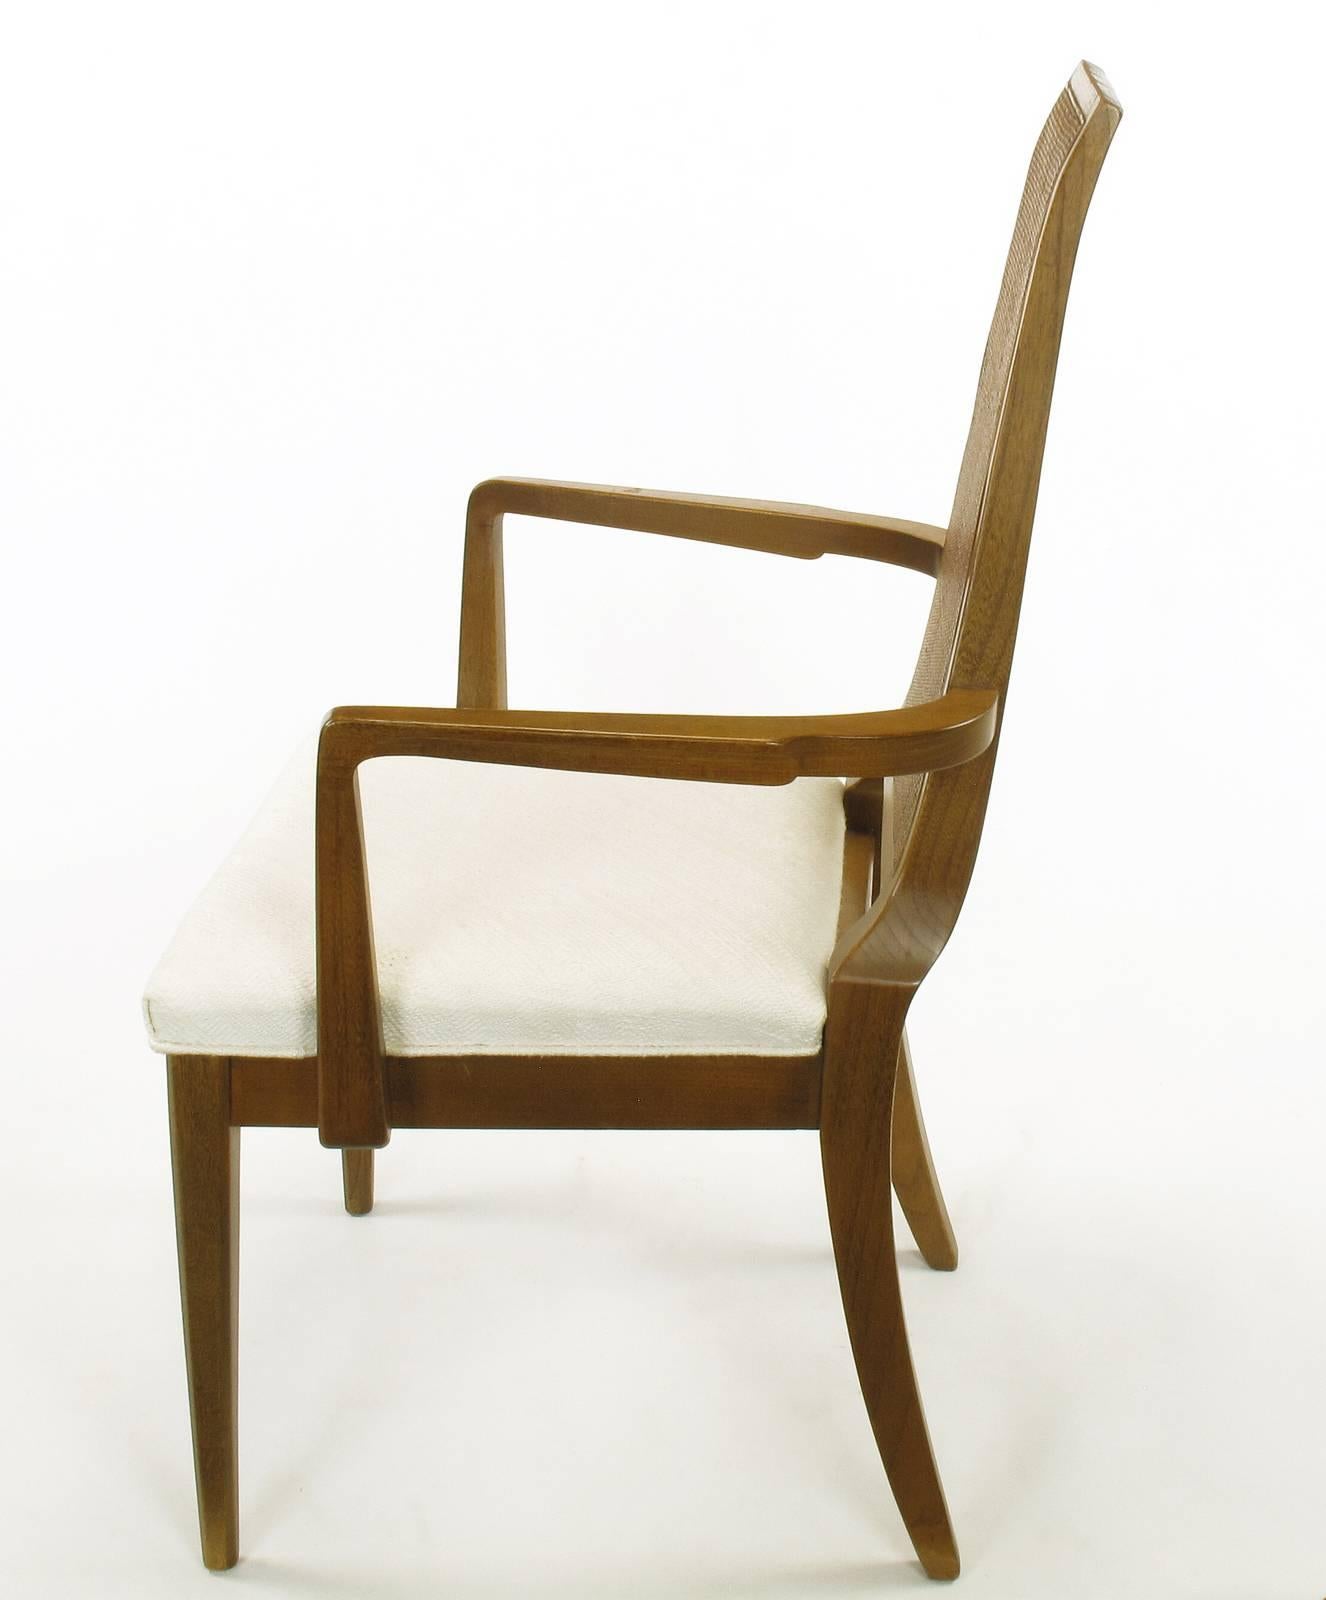 Sleek, circa 1950s Modern Walnut and Cane Dining Chairs For Sale 1